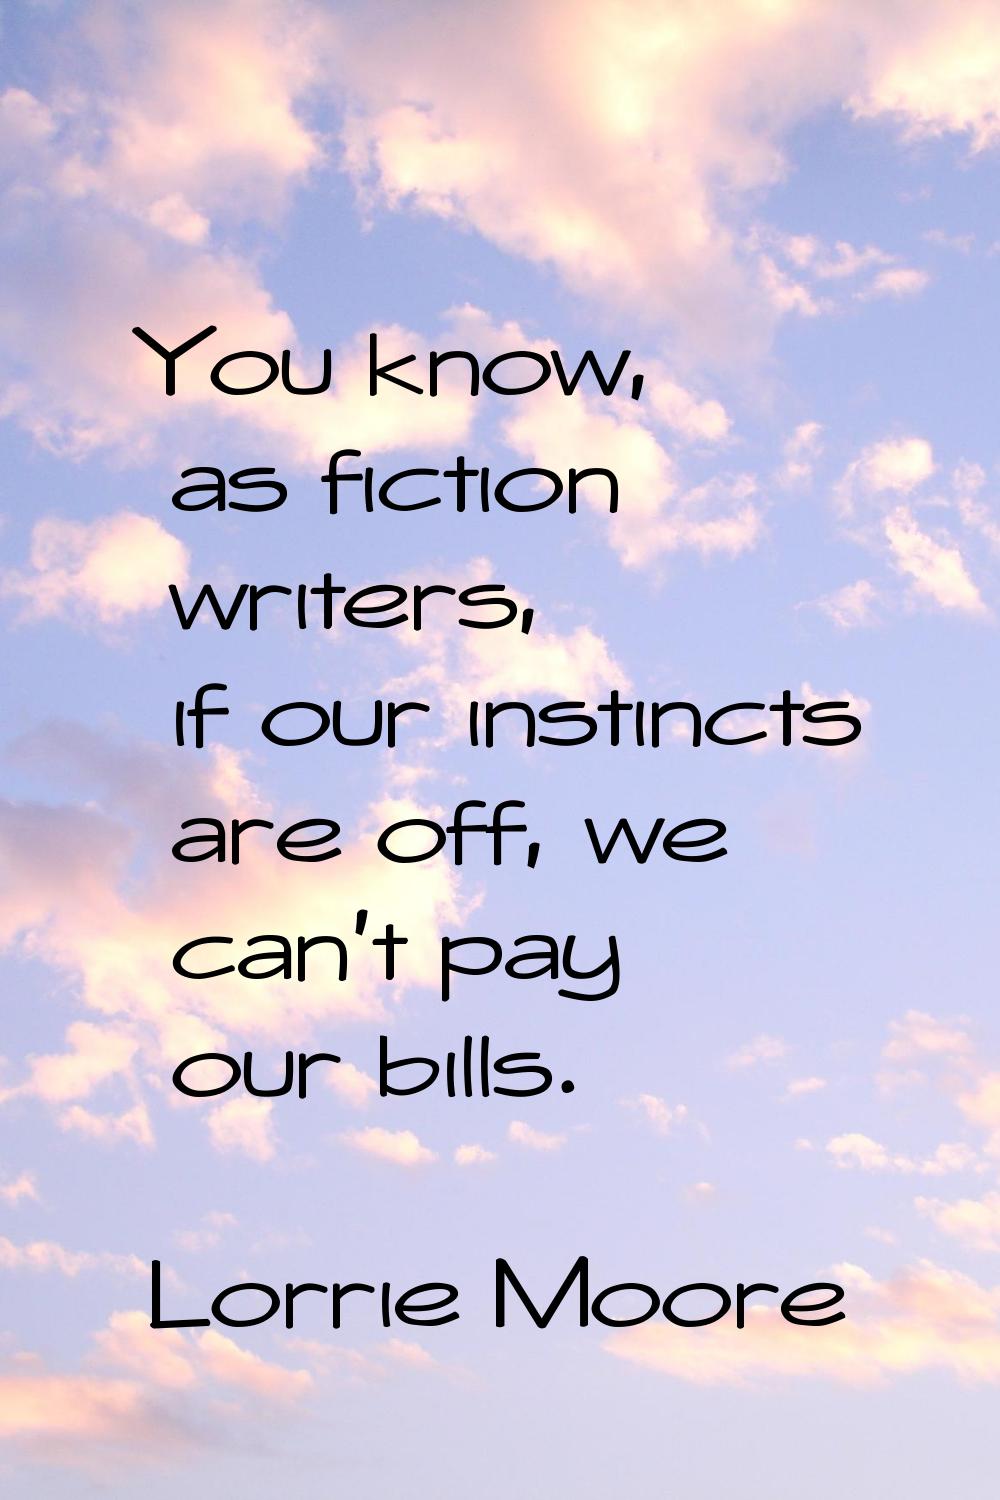 You know, as fiction writers, if our instincts are off, we can't pay our bills.